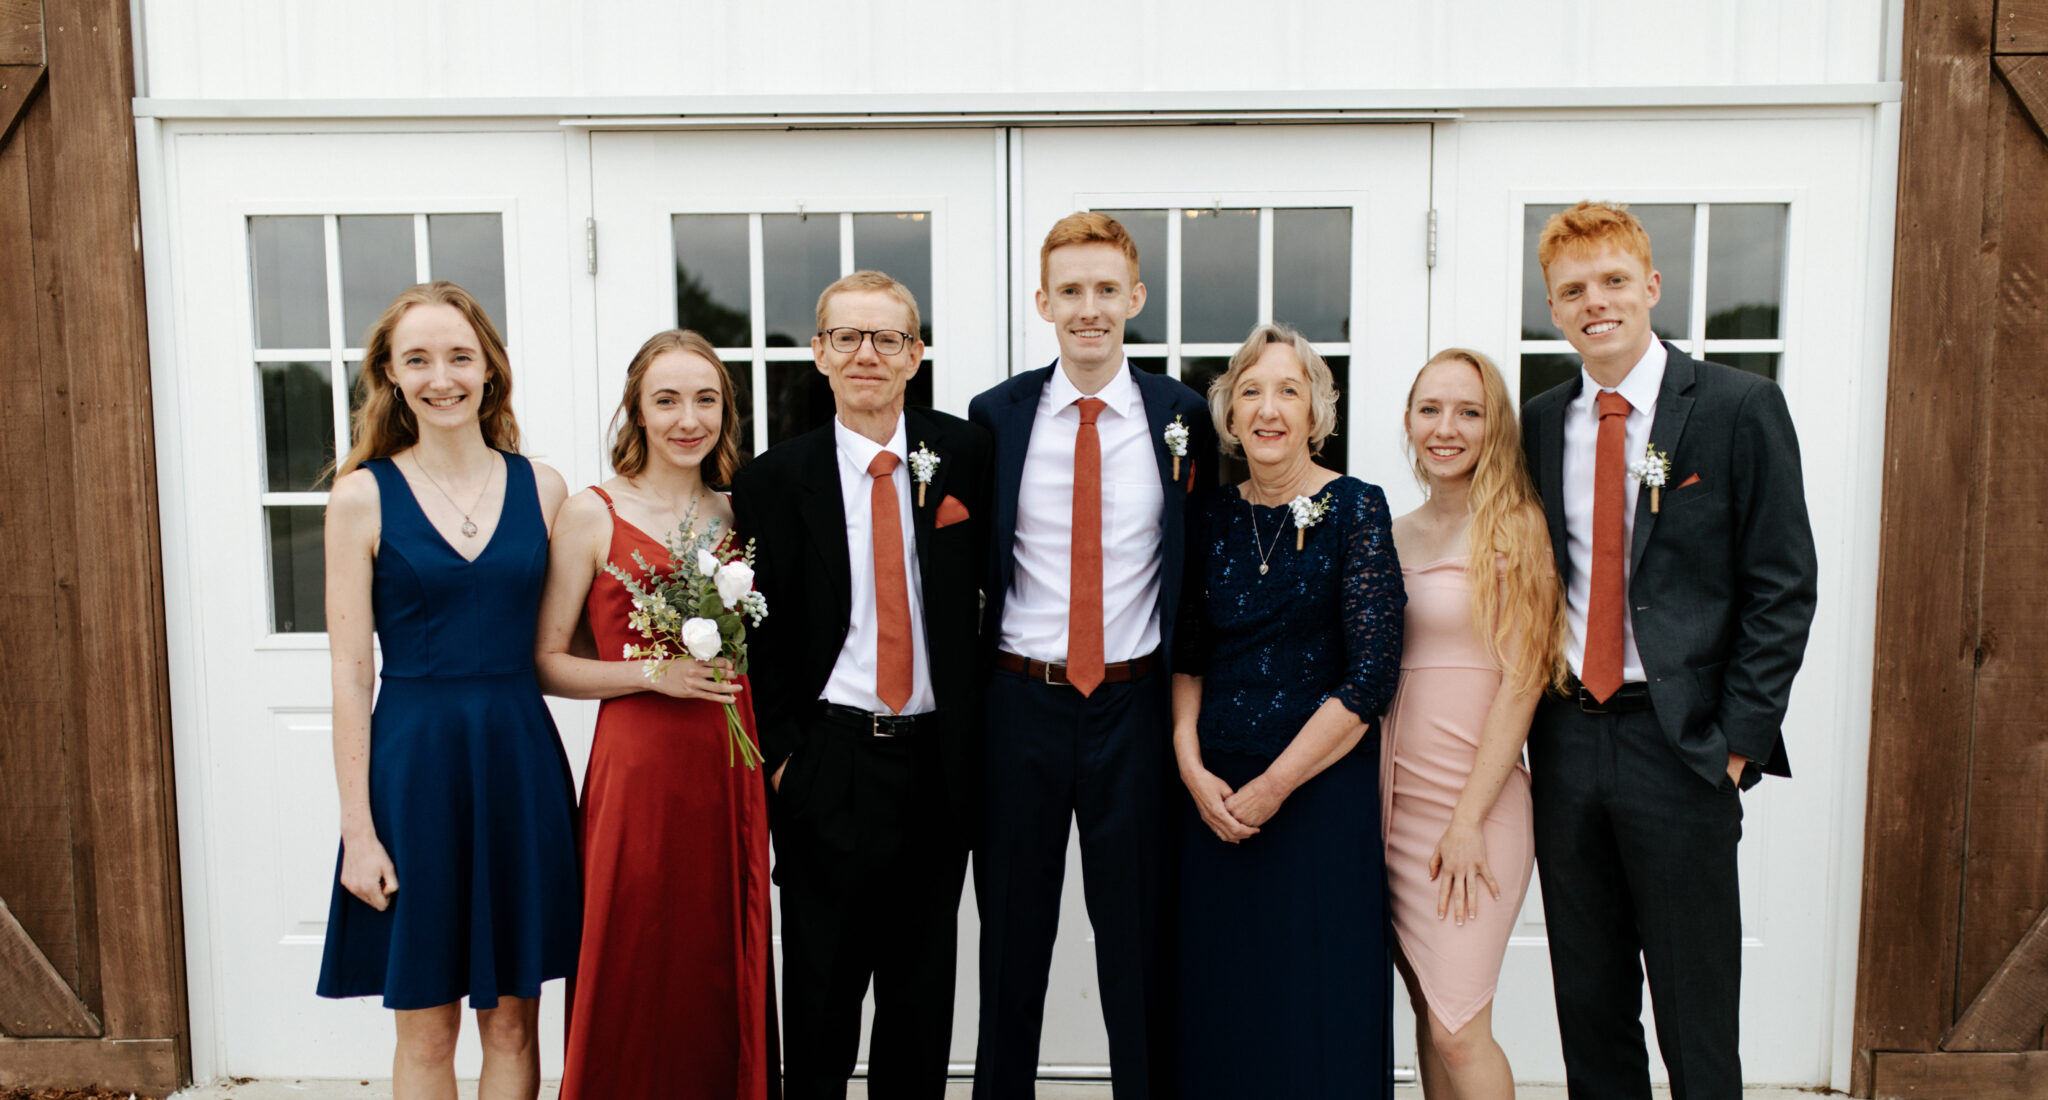 The Reasoner family poses at Seth’s wedding. From left to right: Kaitlyn, Clara, Mark (their dad), Seth, Wendy, Emma and Noah.